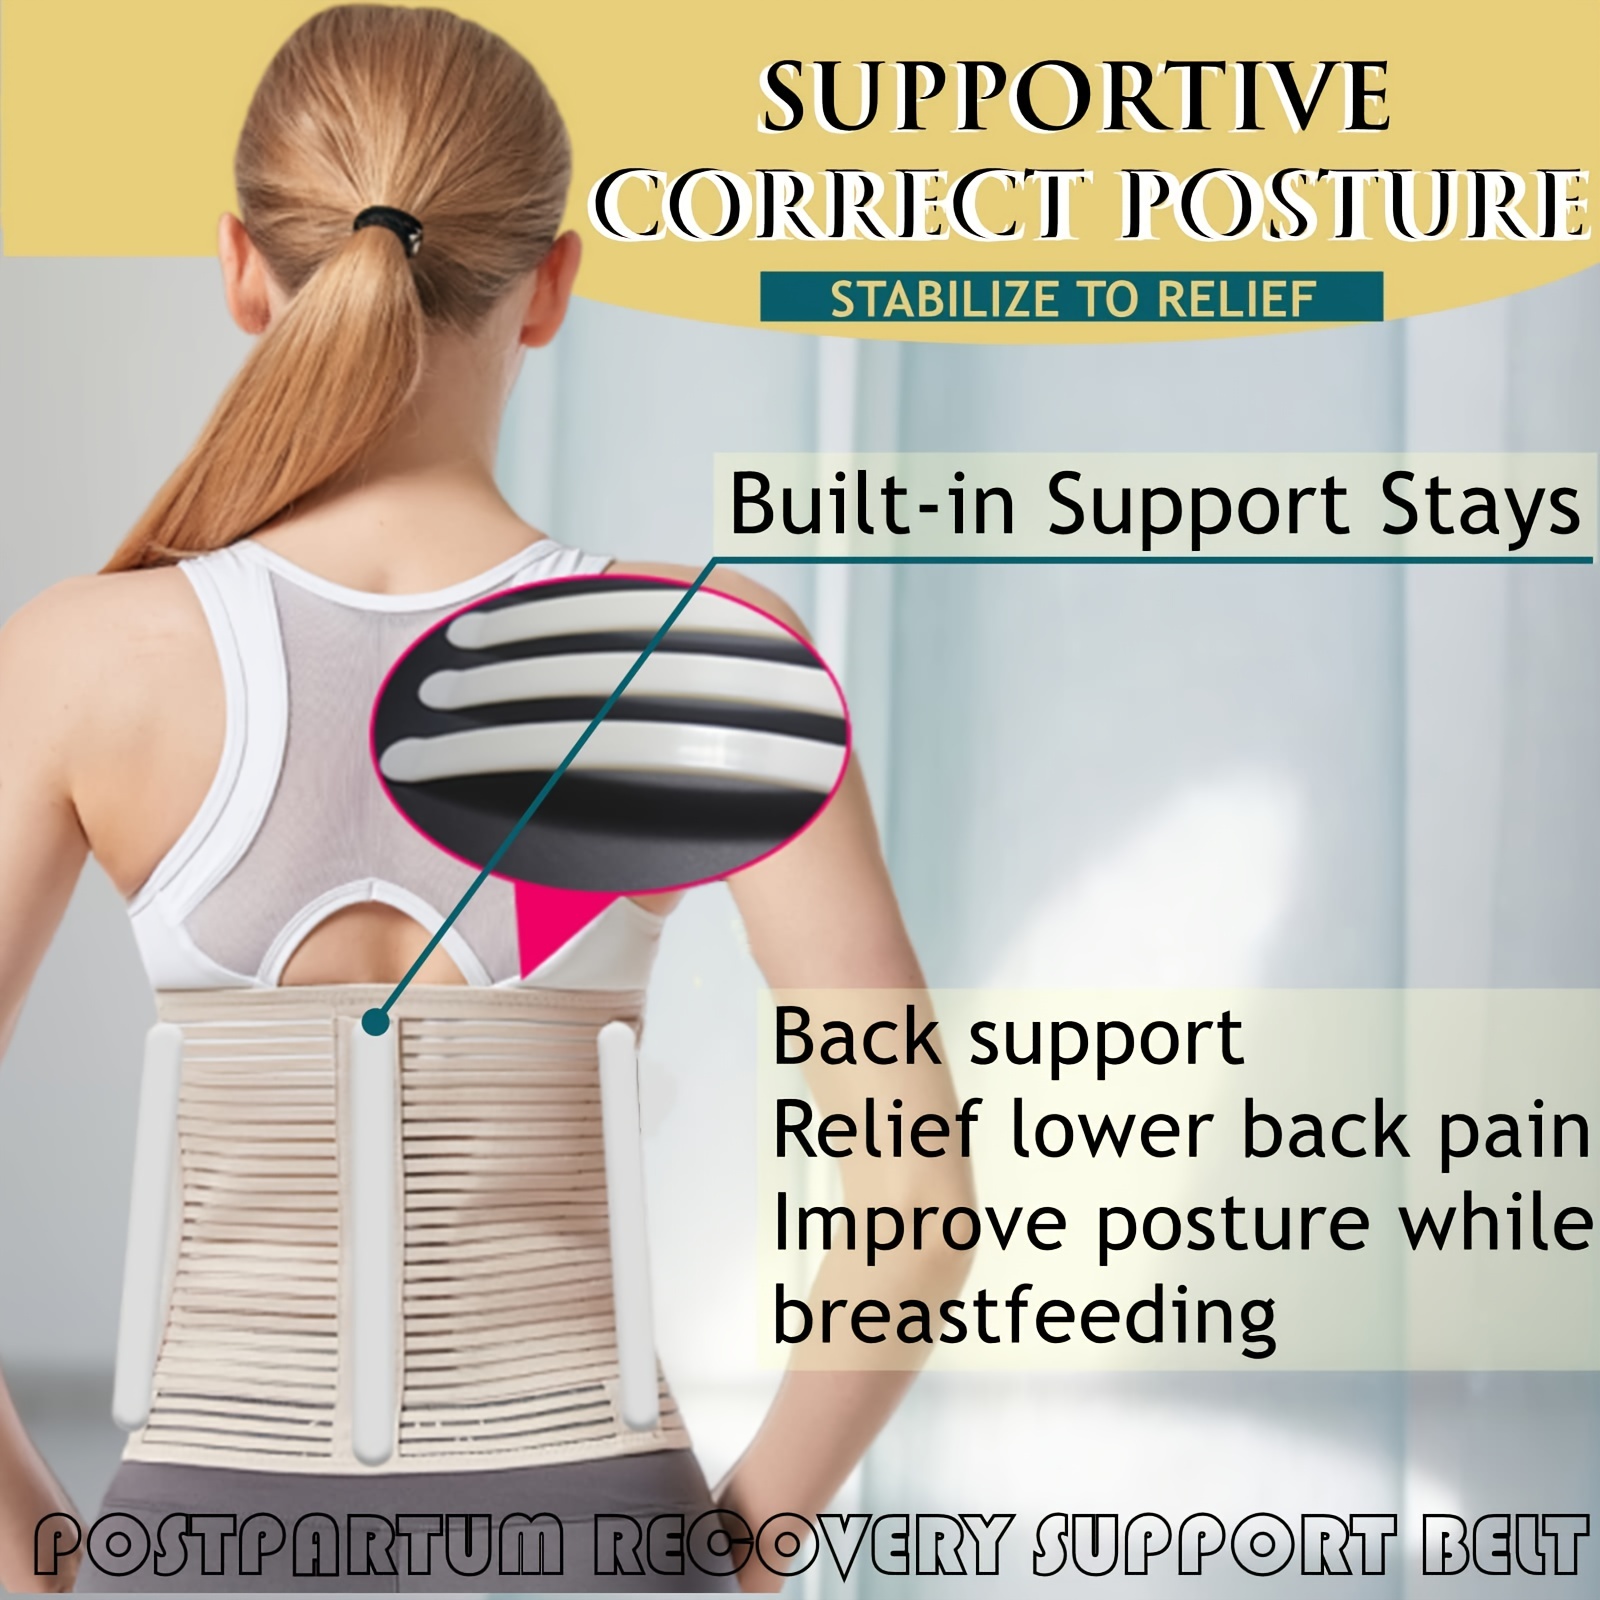 Get Back In Shape Quickly Postpartum Belly Band C section - Temu